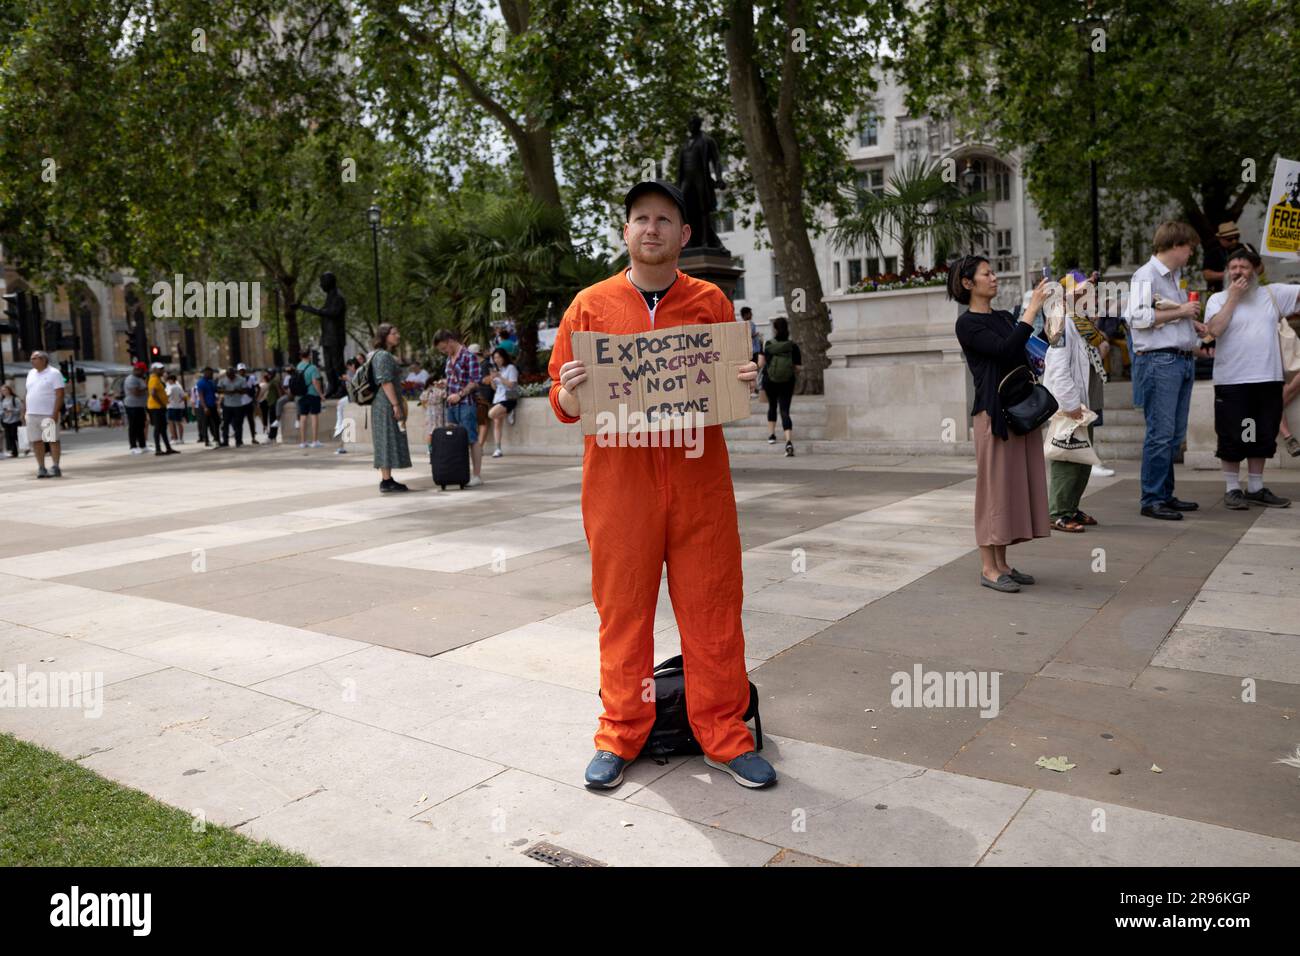 London, UK. 24th June, 2023. A supporter is seen wearing a prisoner costume and holding a placard in solidarity with Julian Assange during the demonstration. Supporters of Julian Assange, an Australian editor who found WikiLeak, protest to urge the UK government to release him from Belmarsh Prison and stop extraditing him to the US. (Photo by Hesther Ng/SOPA Images/Sipa USA) Credit: Sipa USA/Alamy Live News Stock Photo